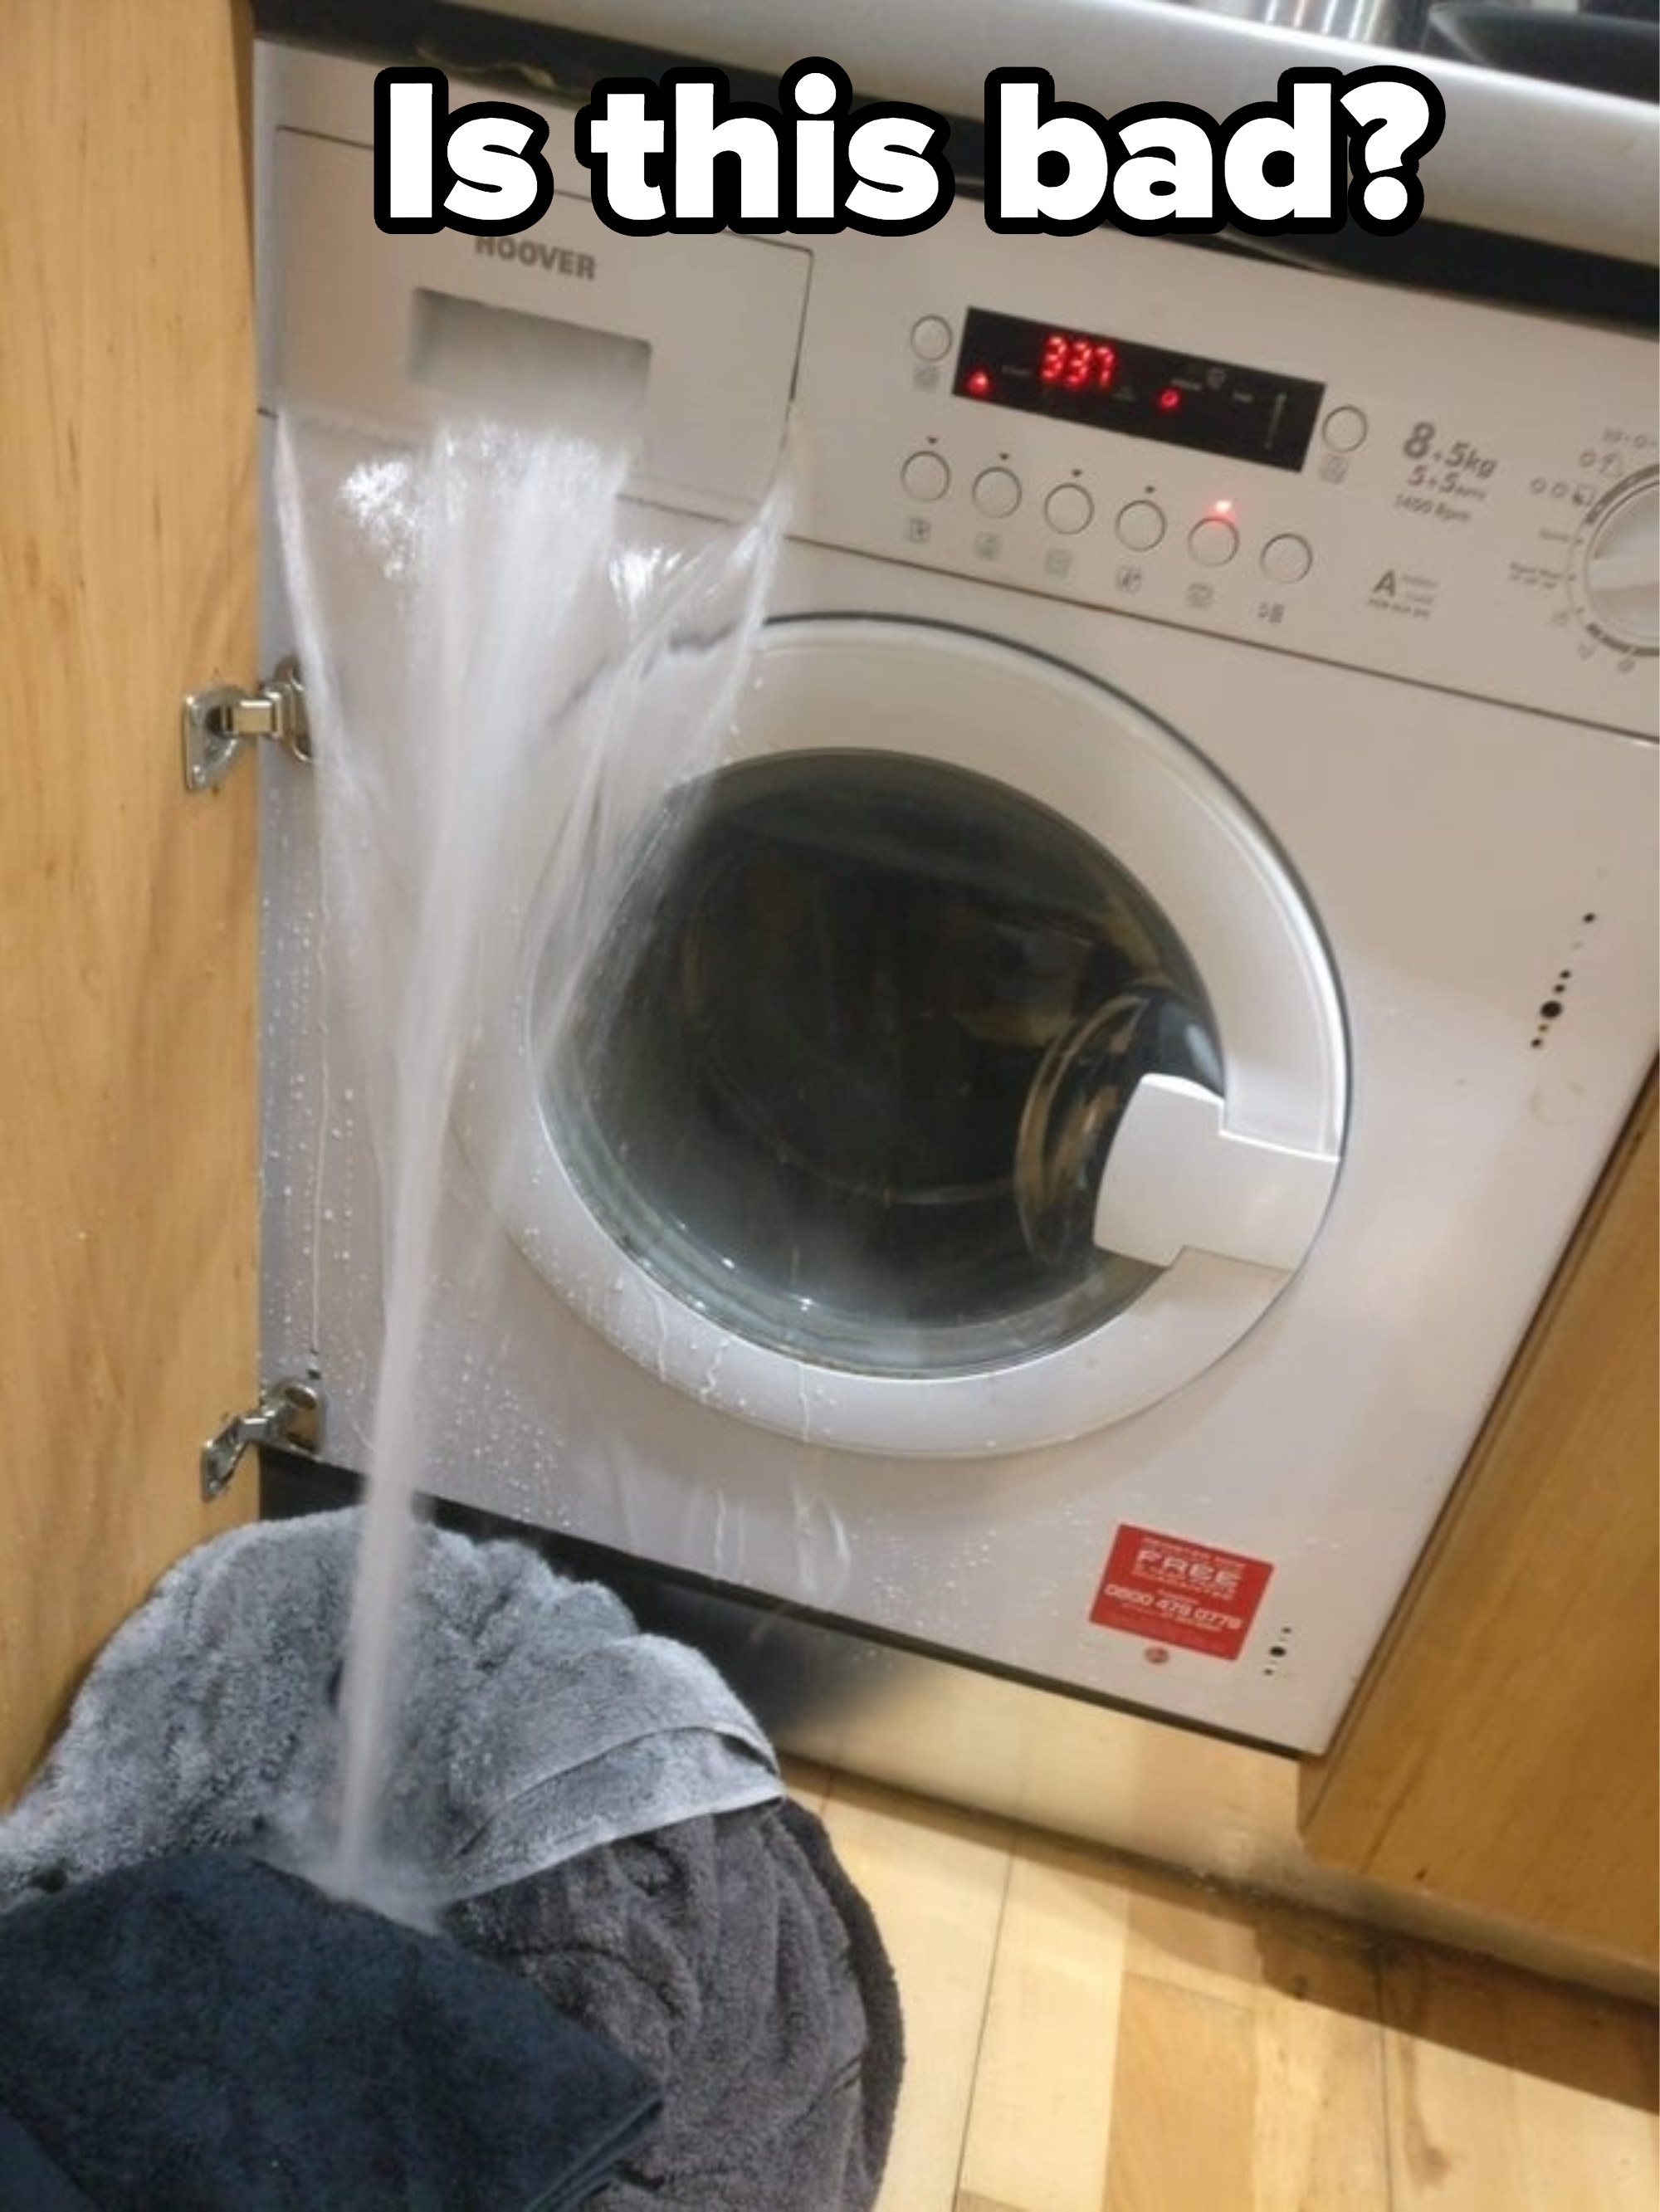 Water coming out of a washing machine